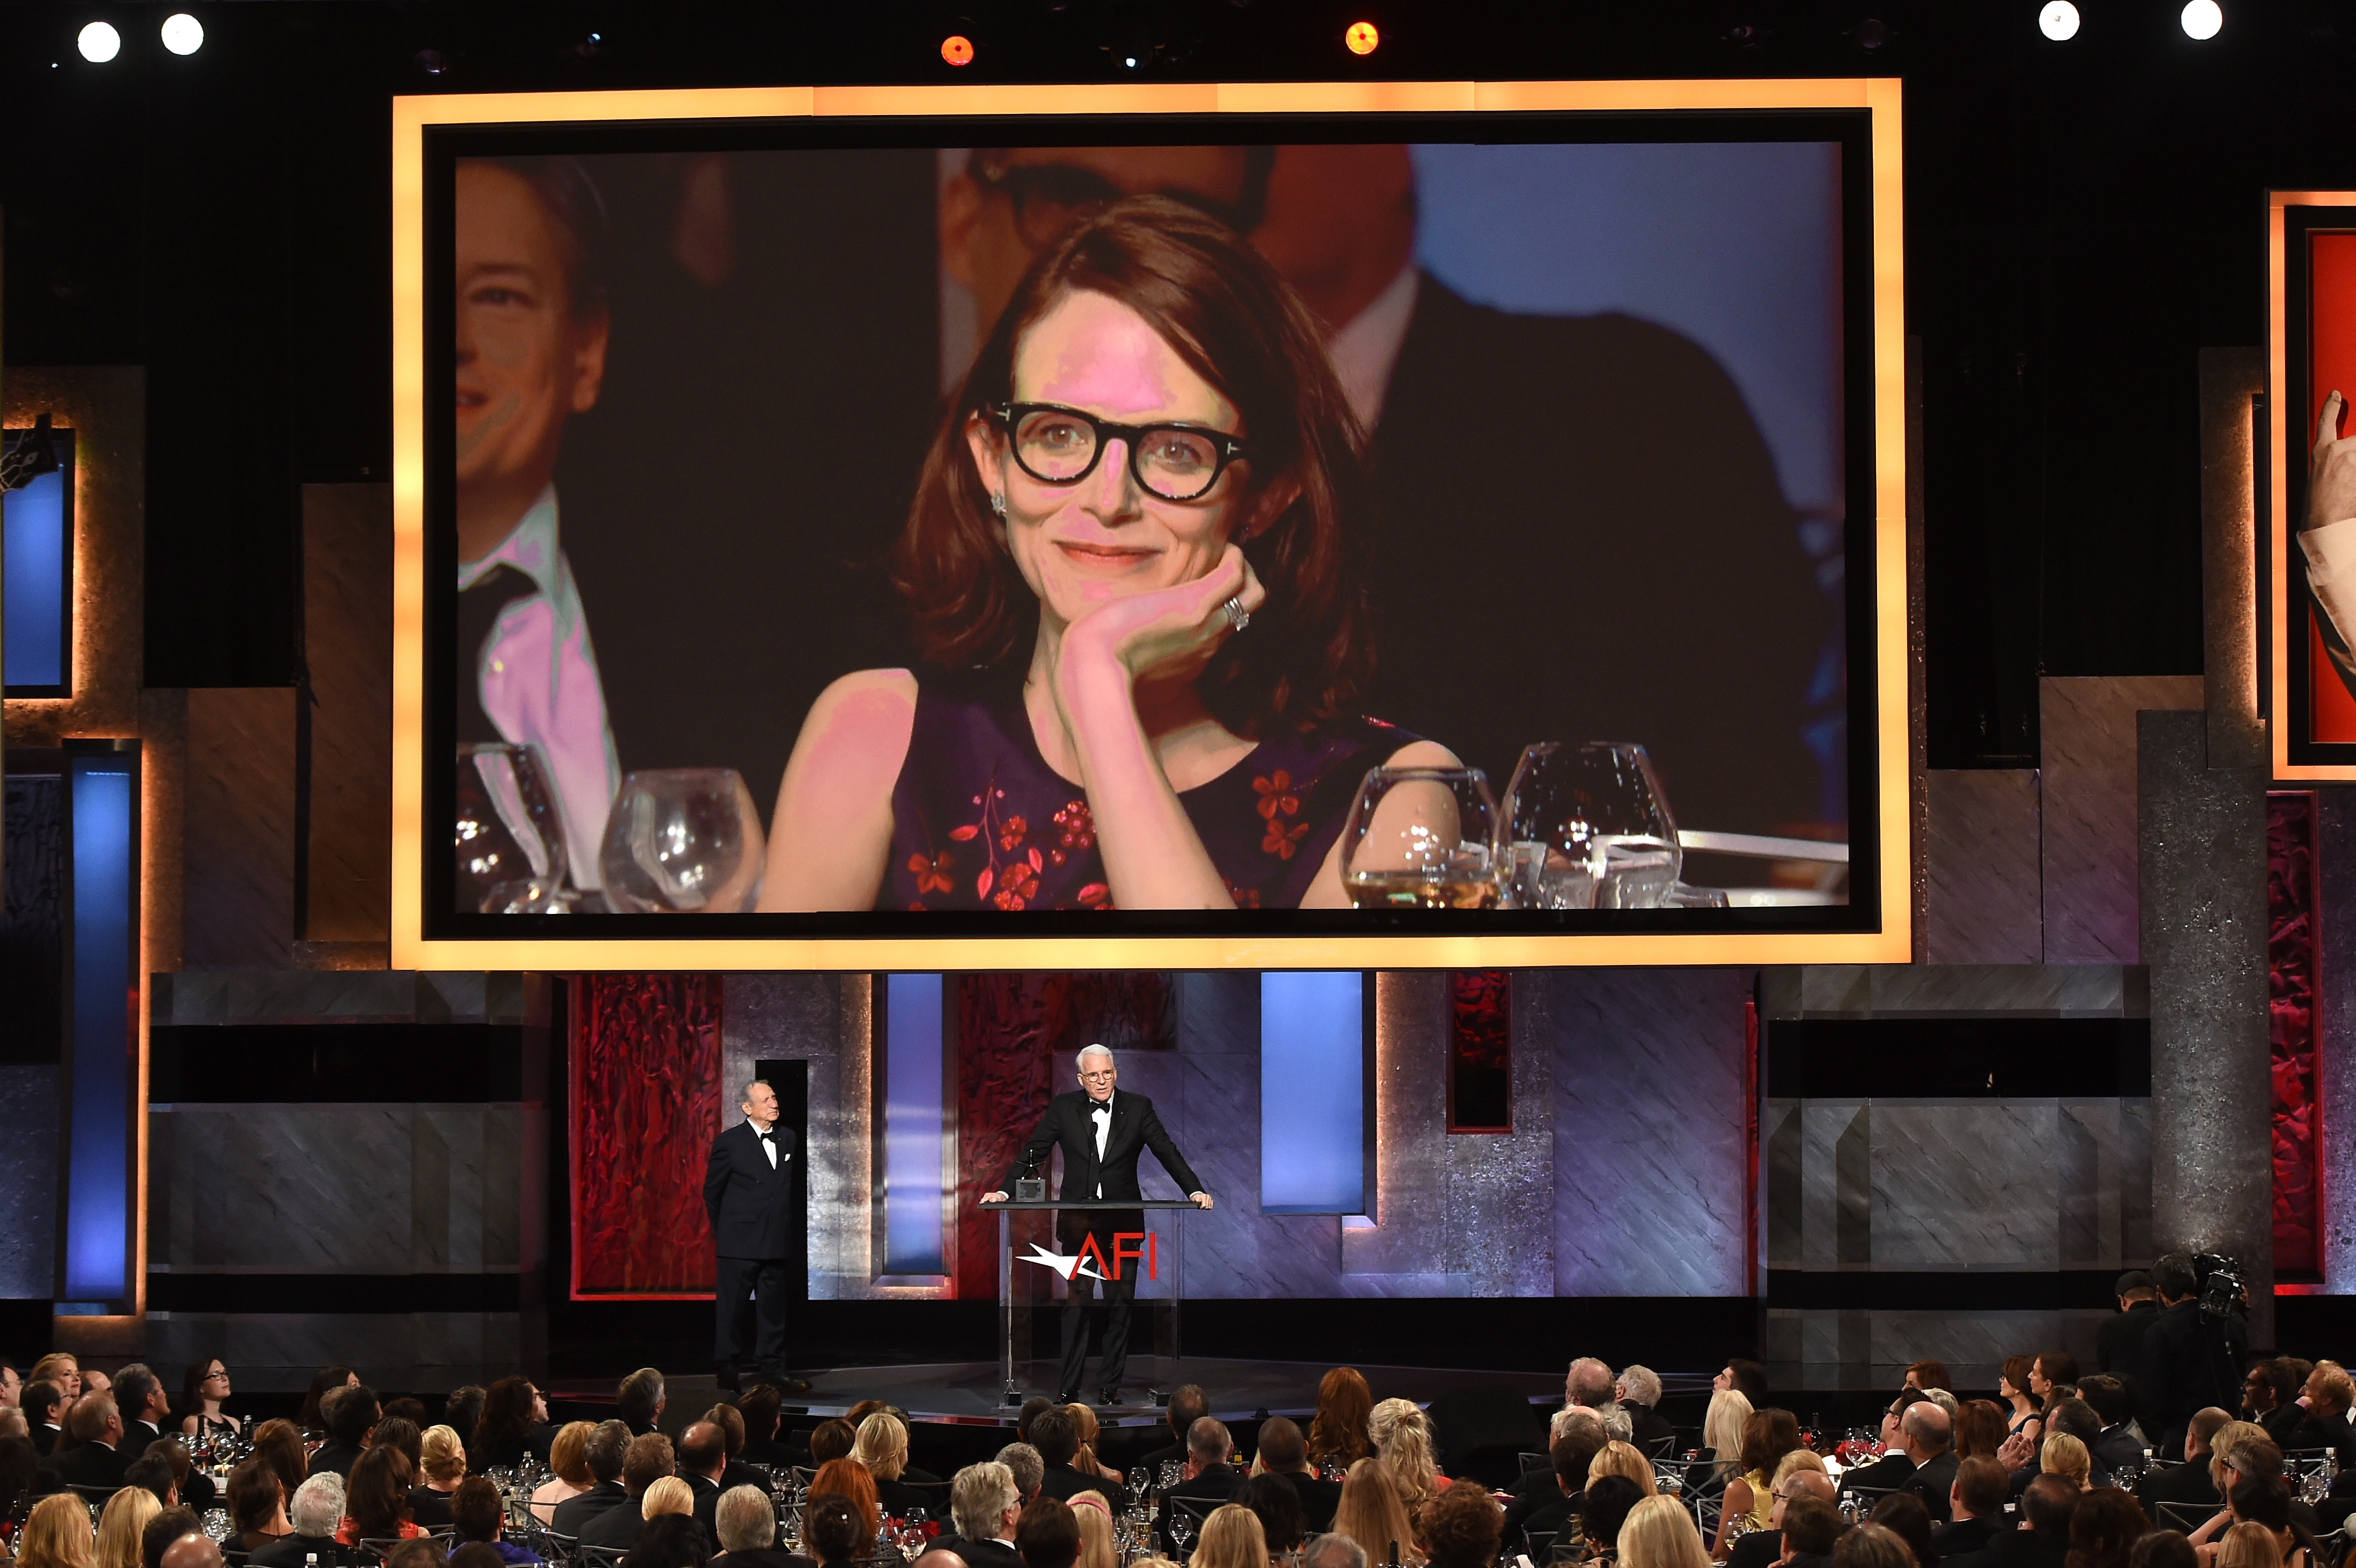 An image of Anne Stringfield appears on a video screen as honoree Steve Martin accepts the AFI Life Achievement Award at the Dolby Theater on June 4, 2015, in Hollywood, California. | Source: Getty Images